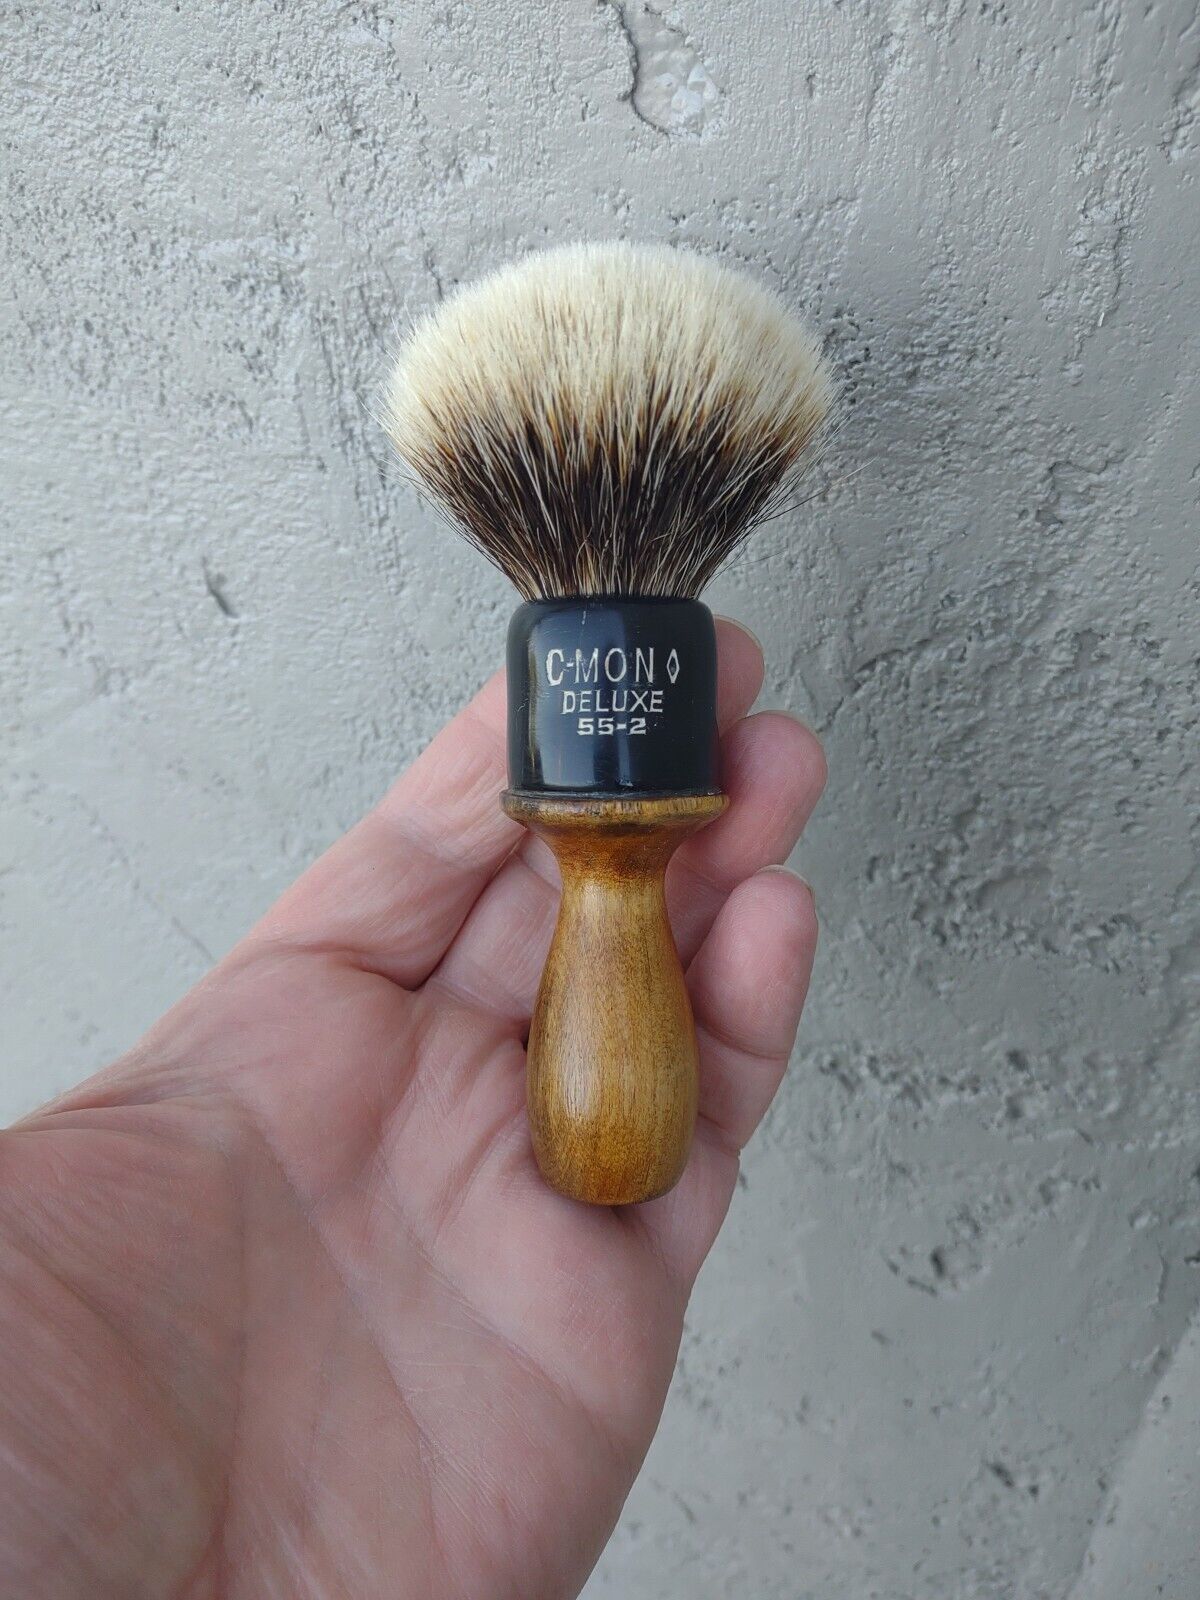 Vintage C-mon Shave Brush With A New 20mm Badger Knot